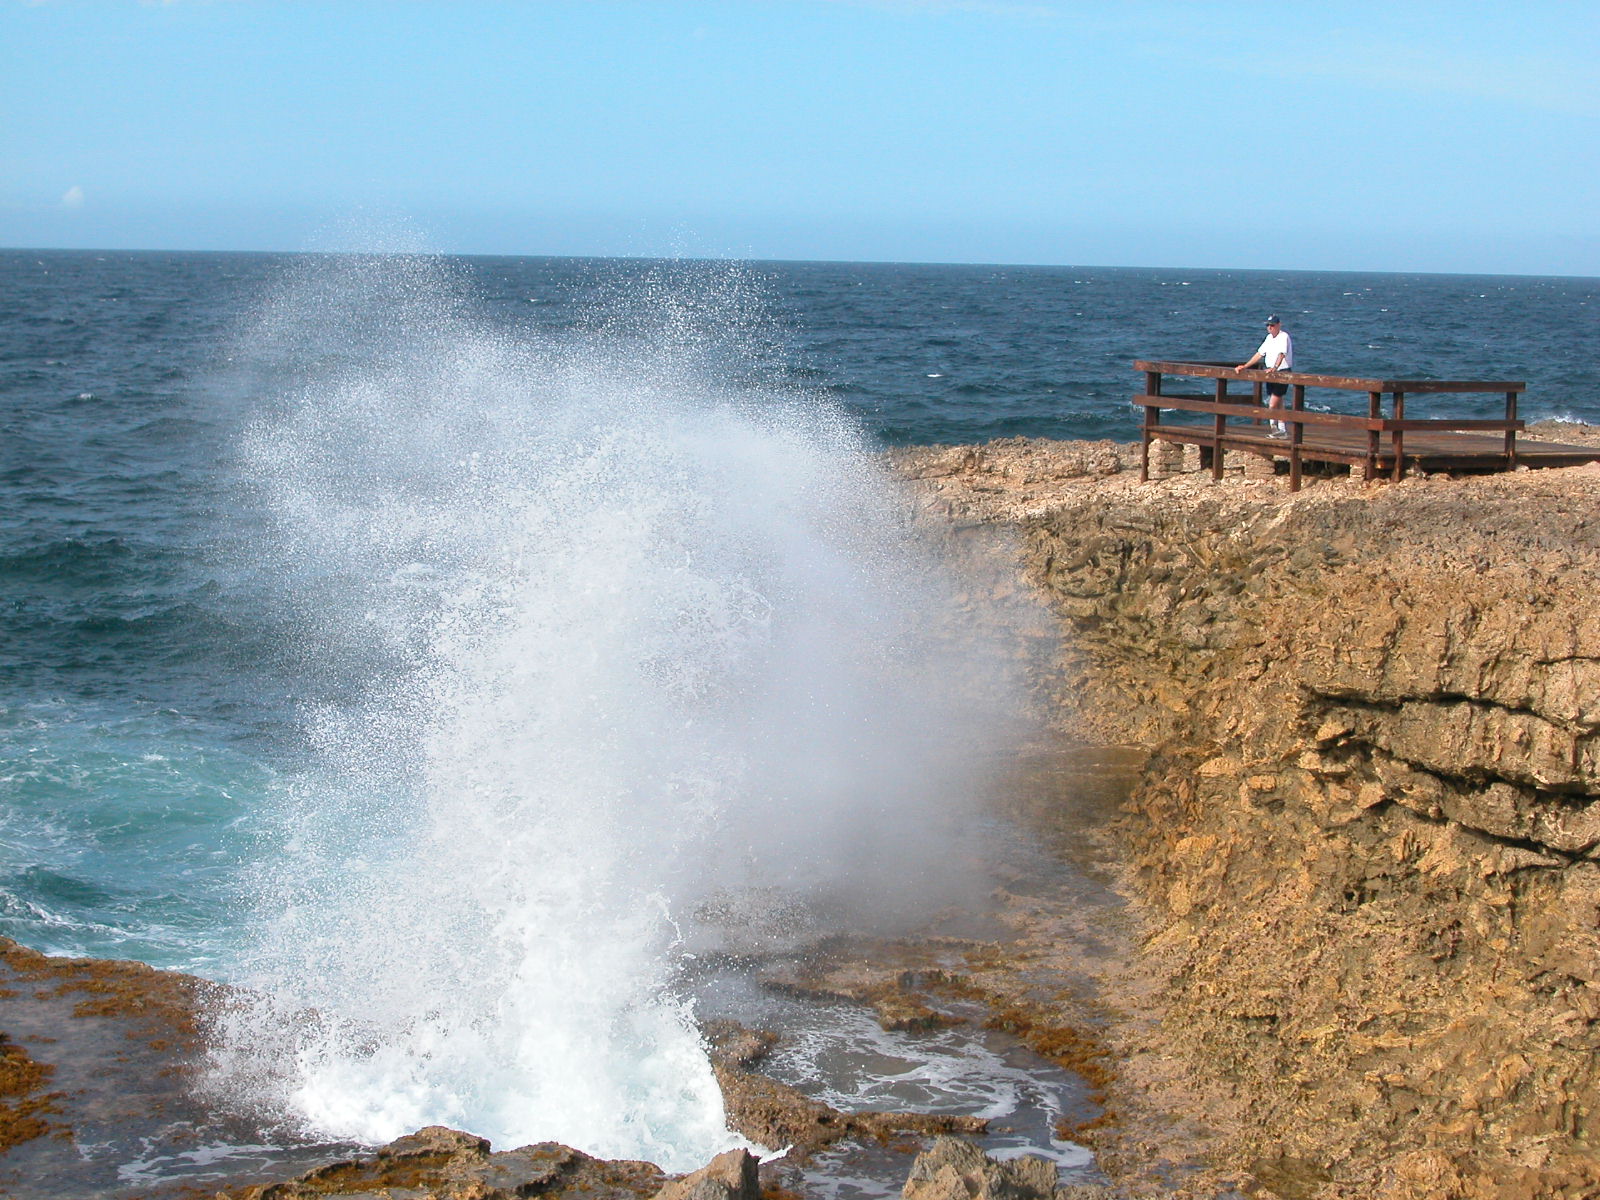 jacco curacao wave spray coast nature elements landscapes seascapes ocean human man humanoid watching rock swell